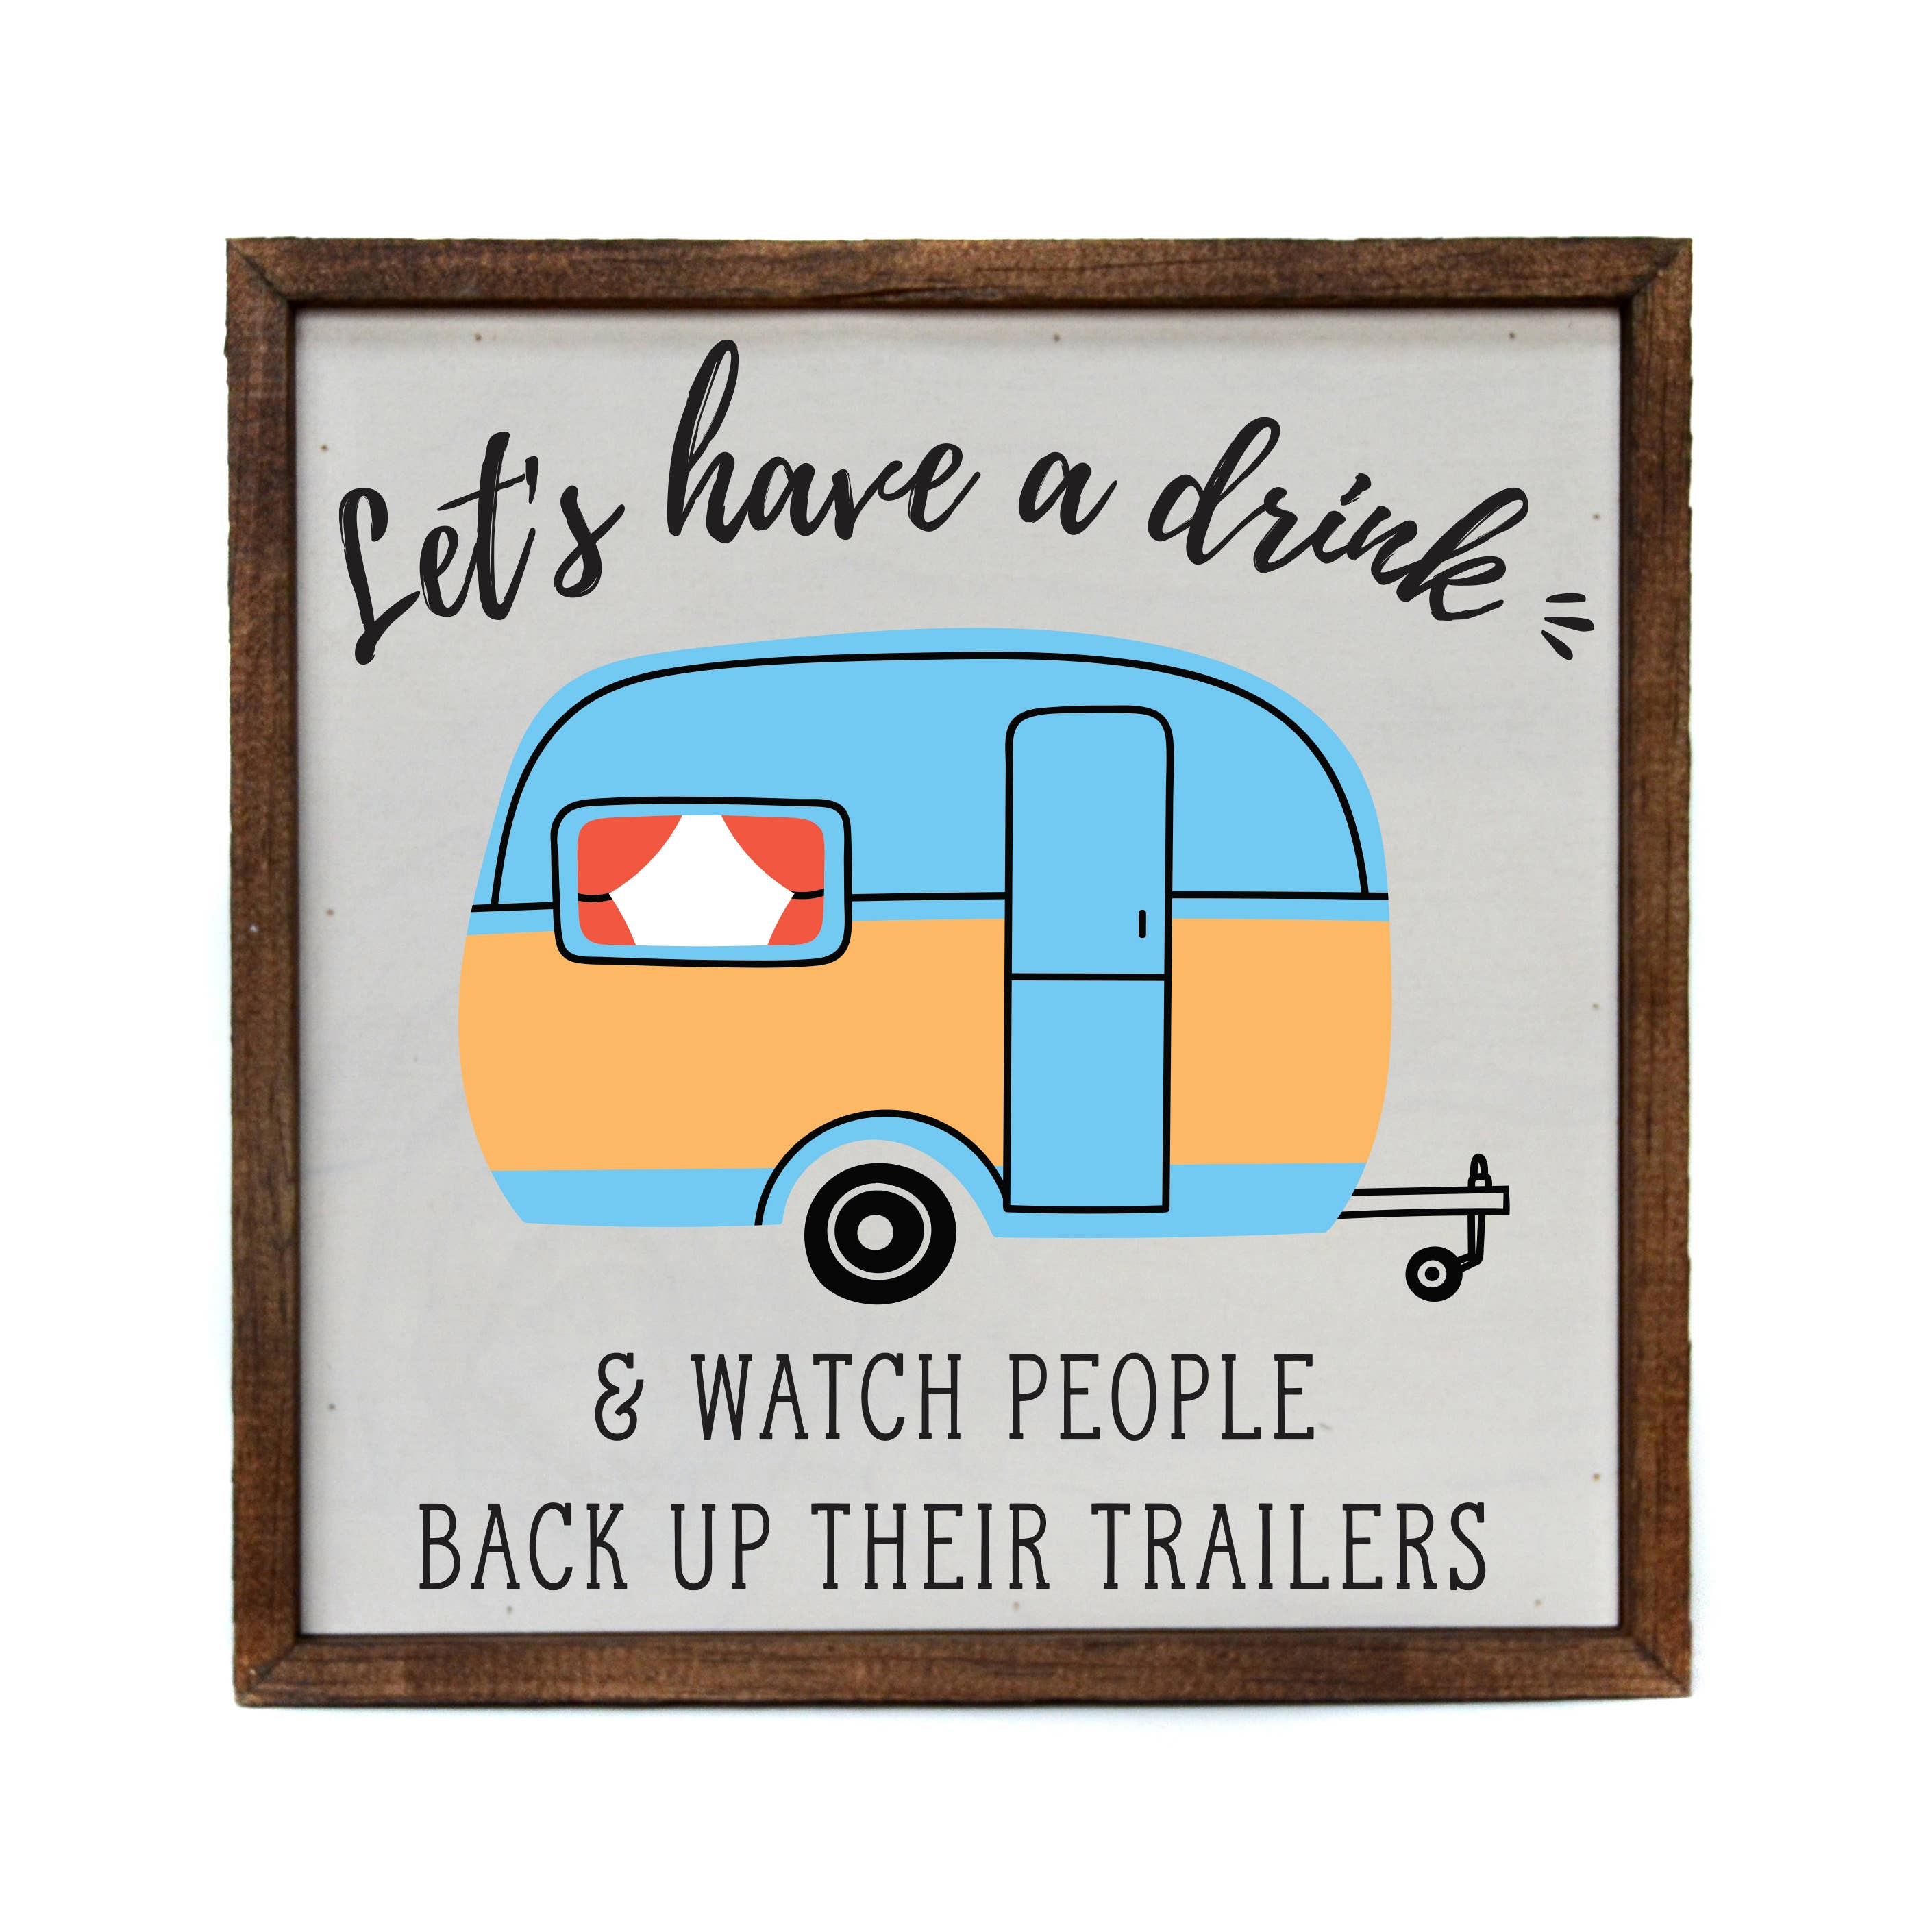 10x10 Let's have a drink - Camping Sign